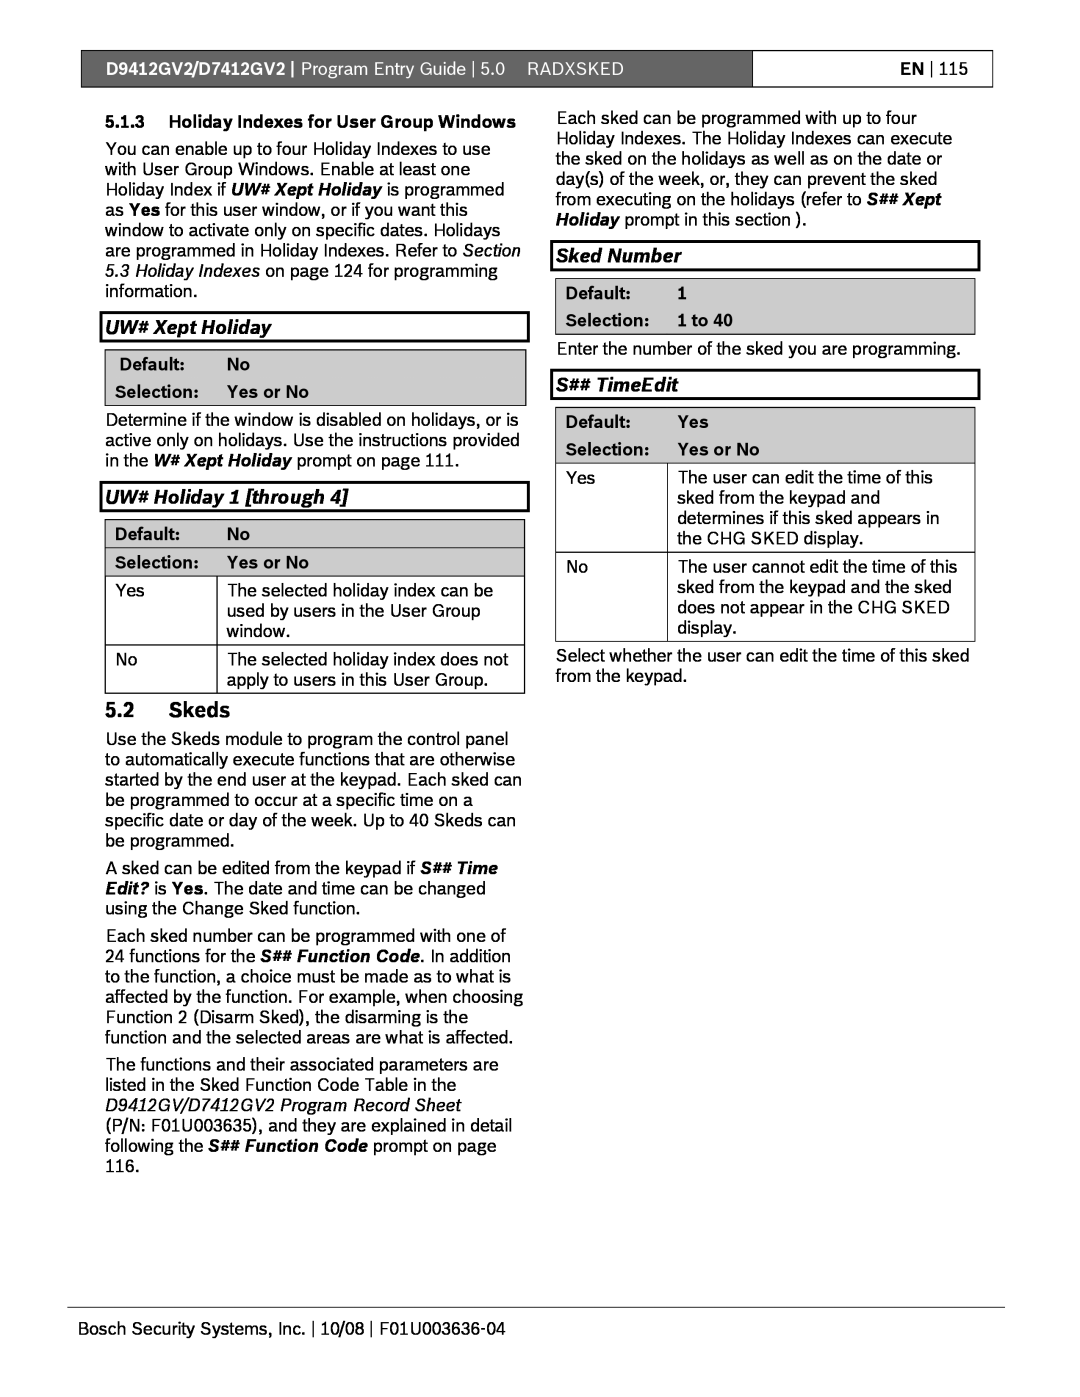 Bosch Appliances D9412GV2 manual 5.2Skeds, UW# Xept Holiday, UW# Holiday 1 through, Sked Number, S## TimeEdit 